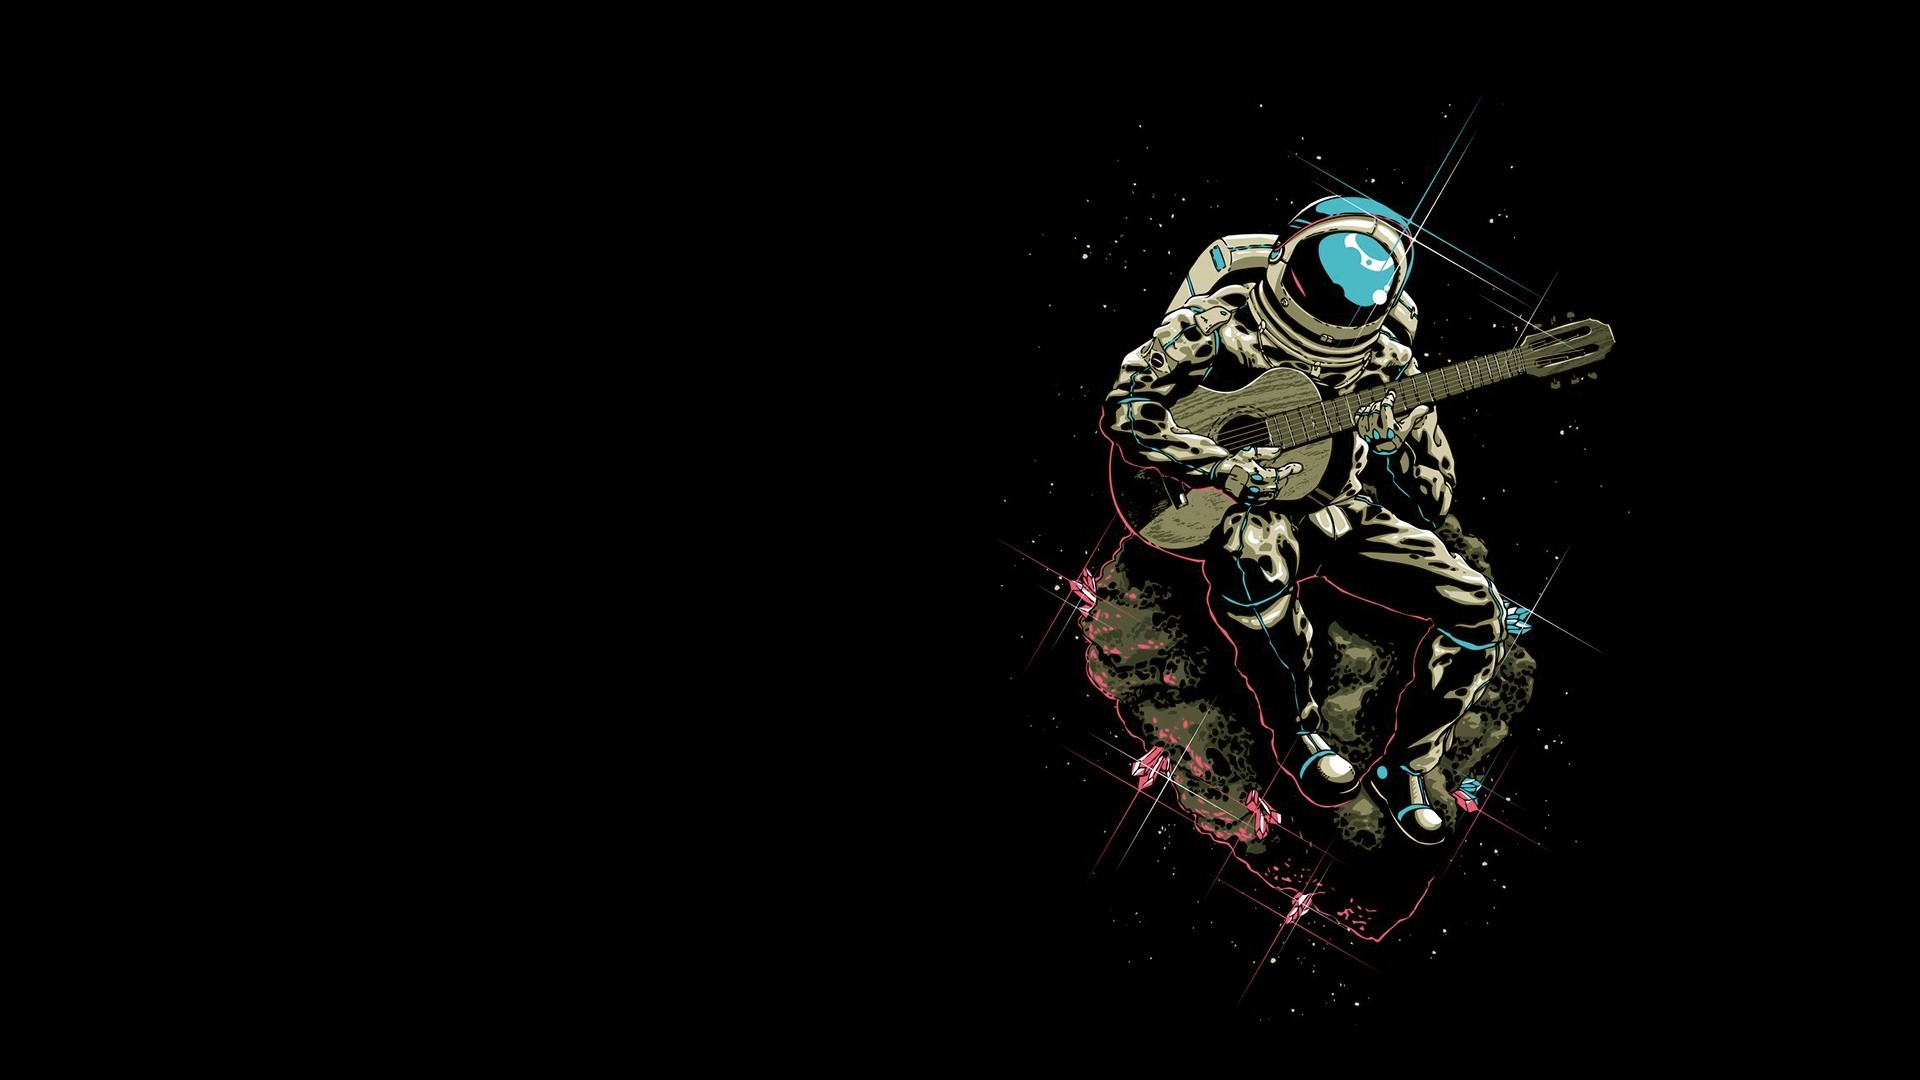 1920x1080  astronaut wallpaper  for android tablet Â· Download Â·  astronaut ...